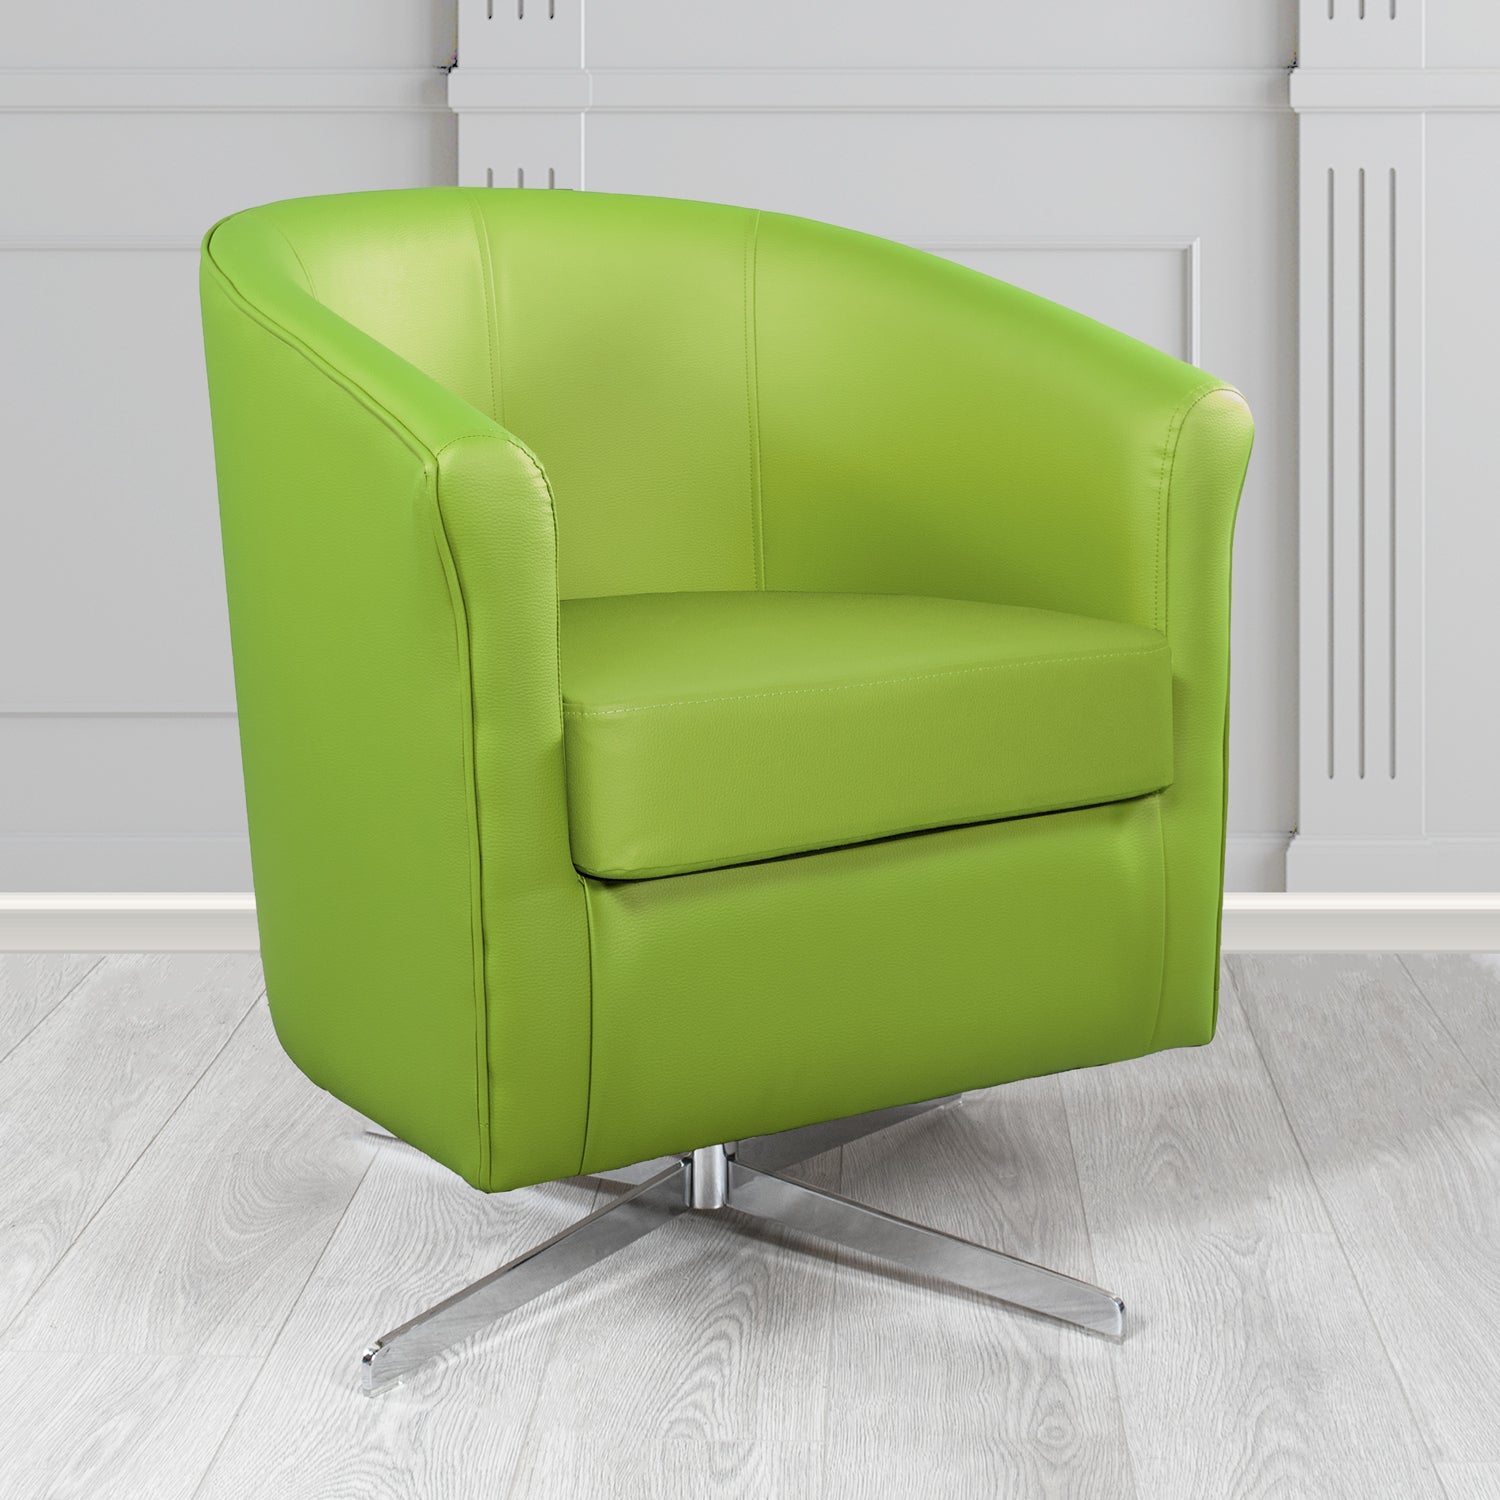 Cannes Swivel Tub Chair in Just Colour Citrus Green Crib 5 Faux Leather - The Tub Chair Shop